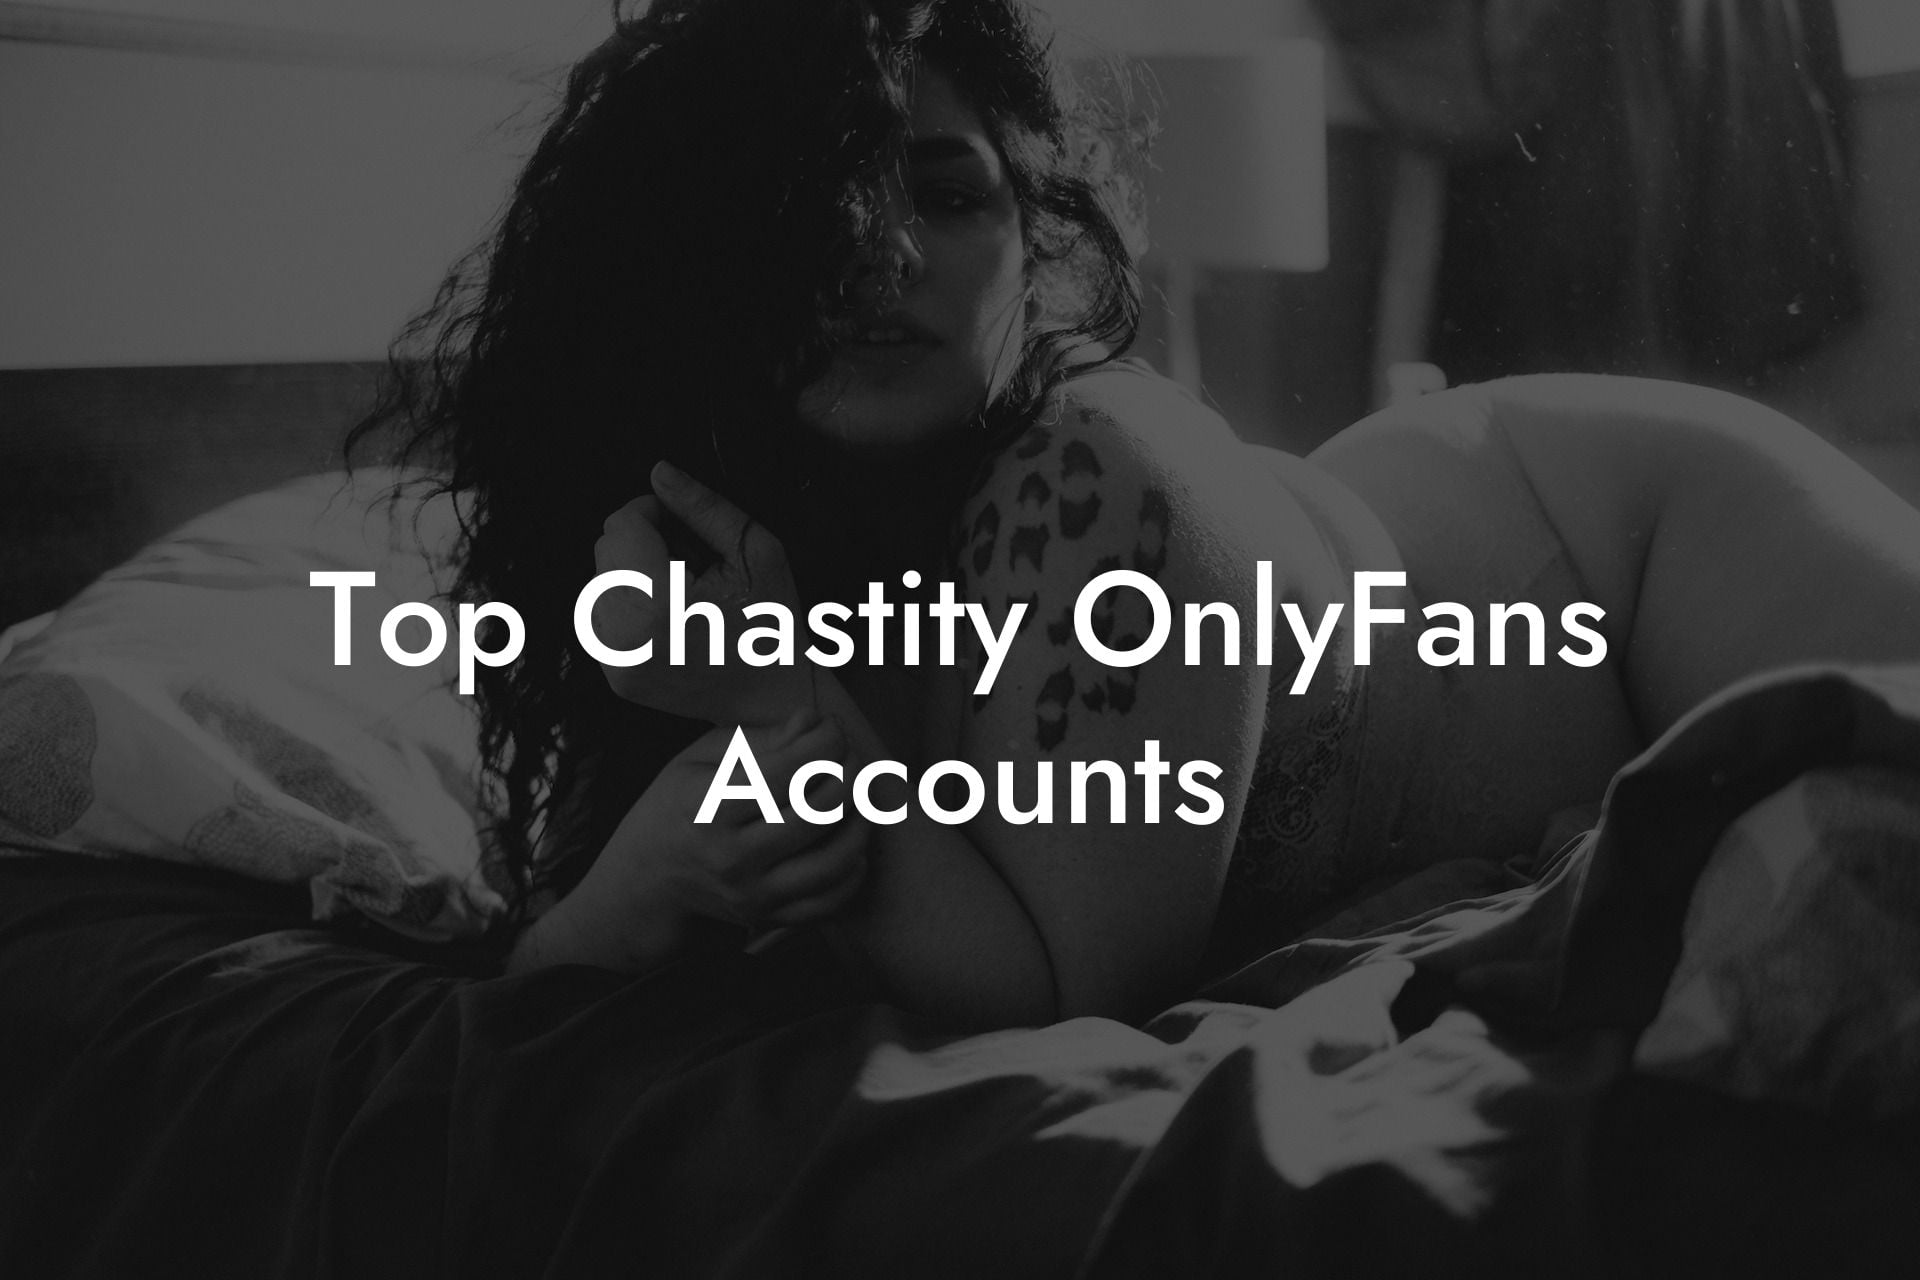 Top Chastity OnlyFans Accounts